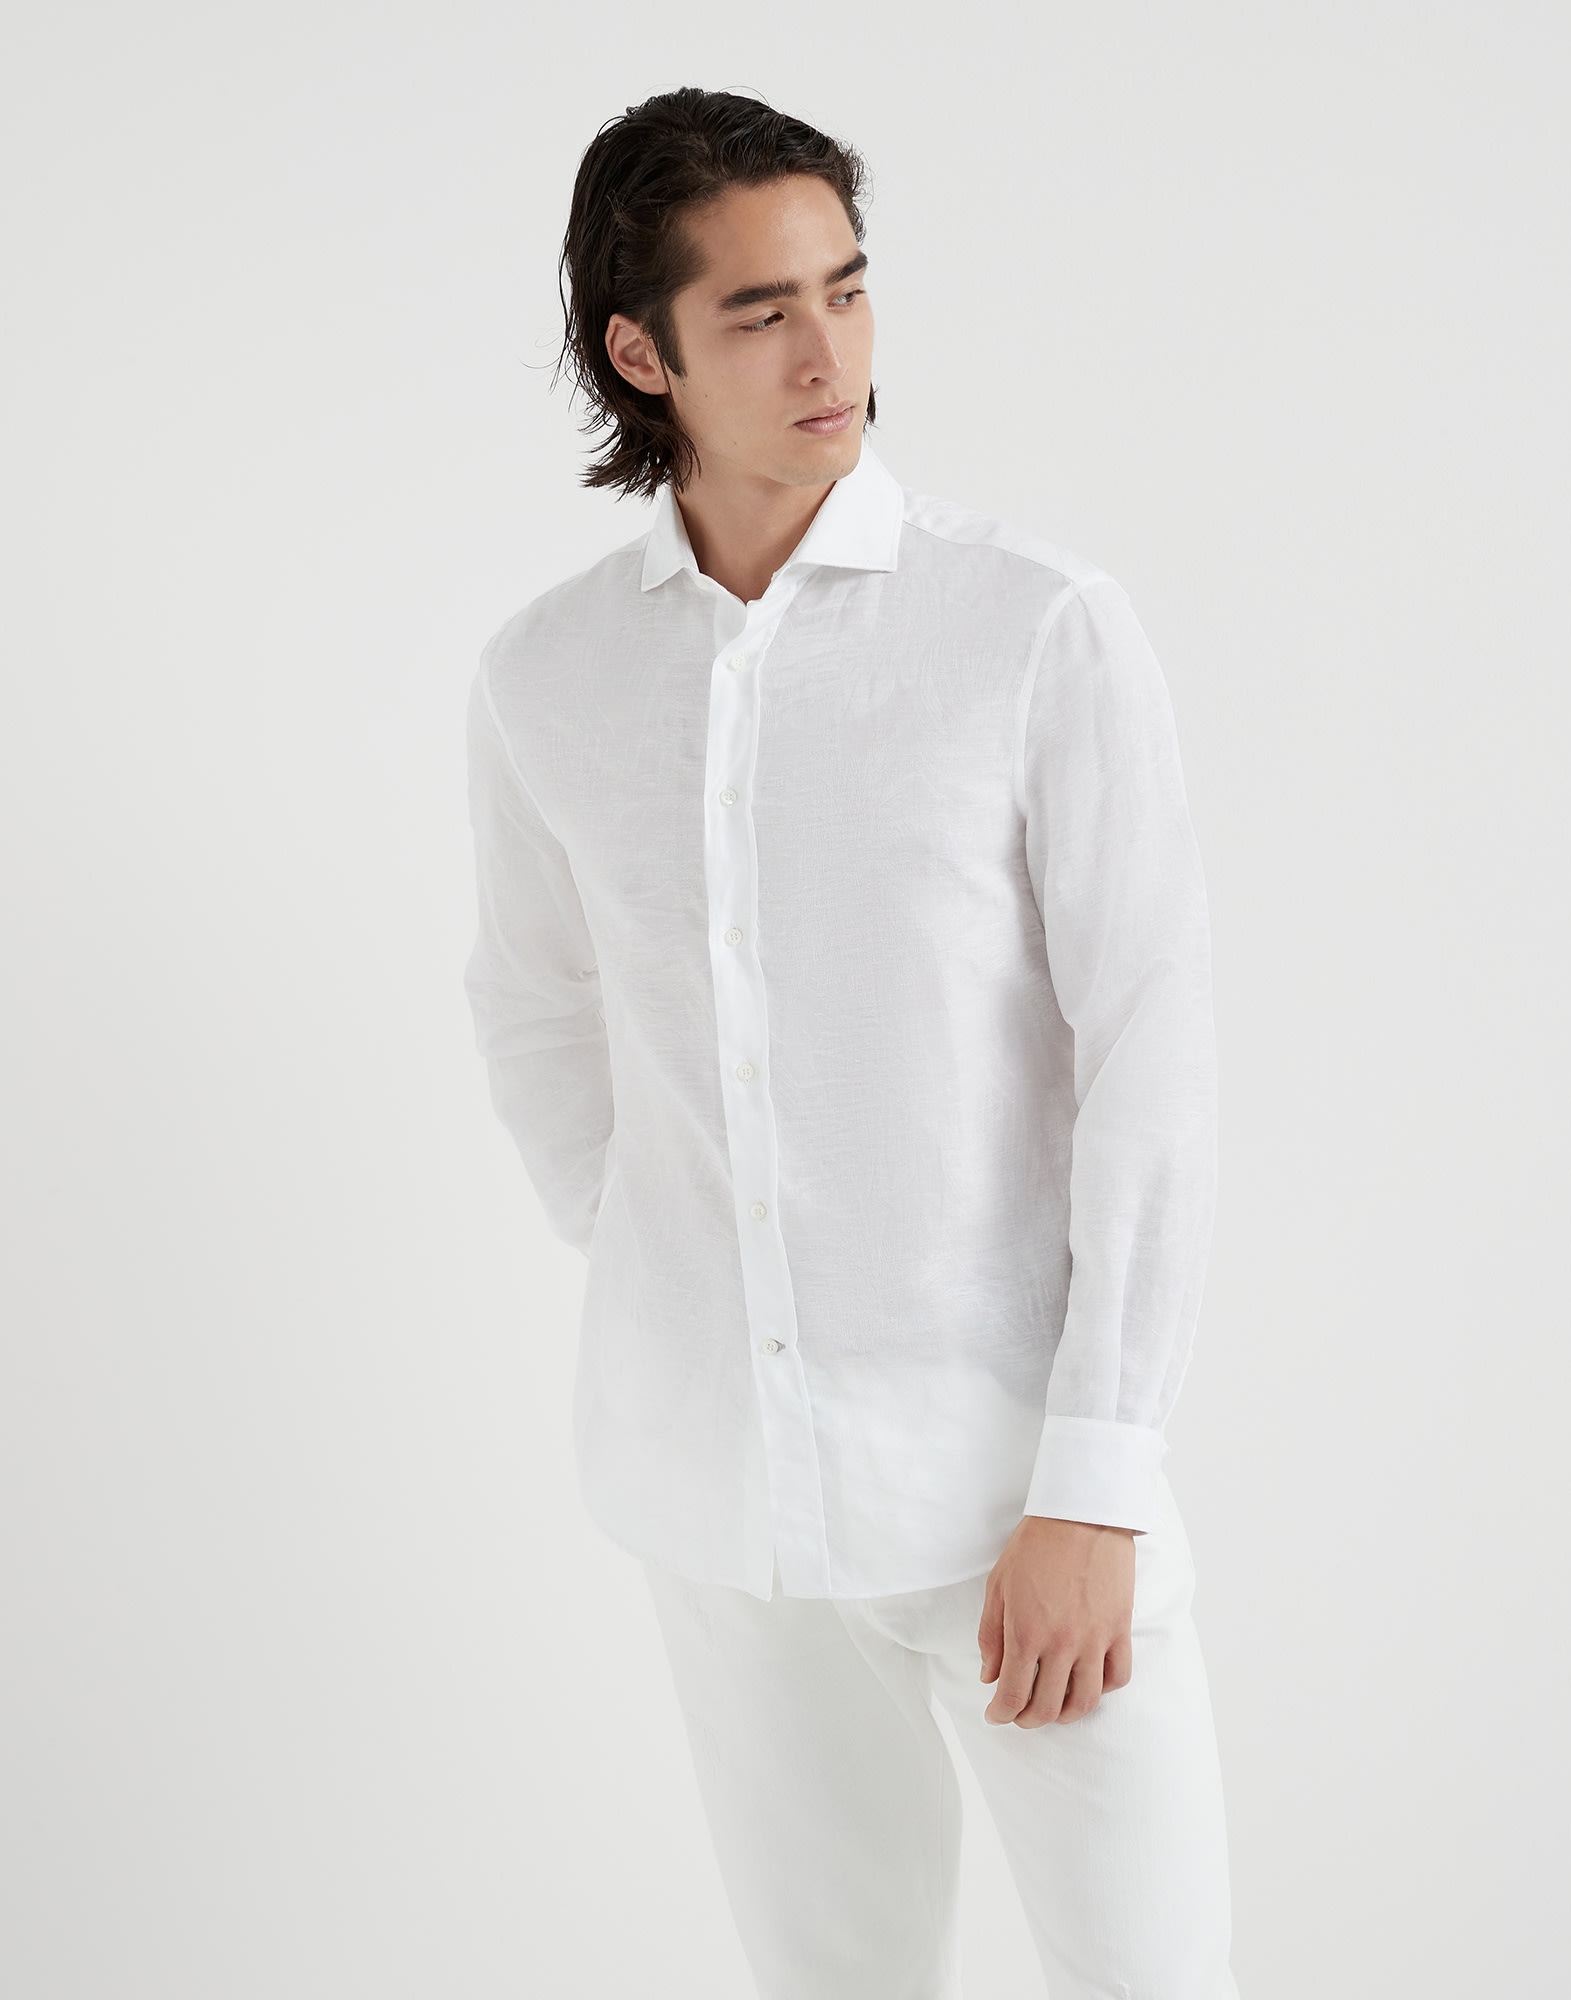 Palm Jacquard linen and cotton easy fit shirt with spread collar - 1